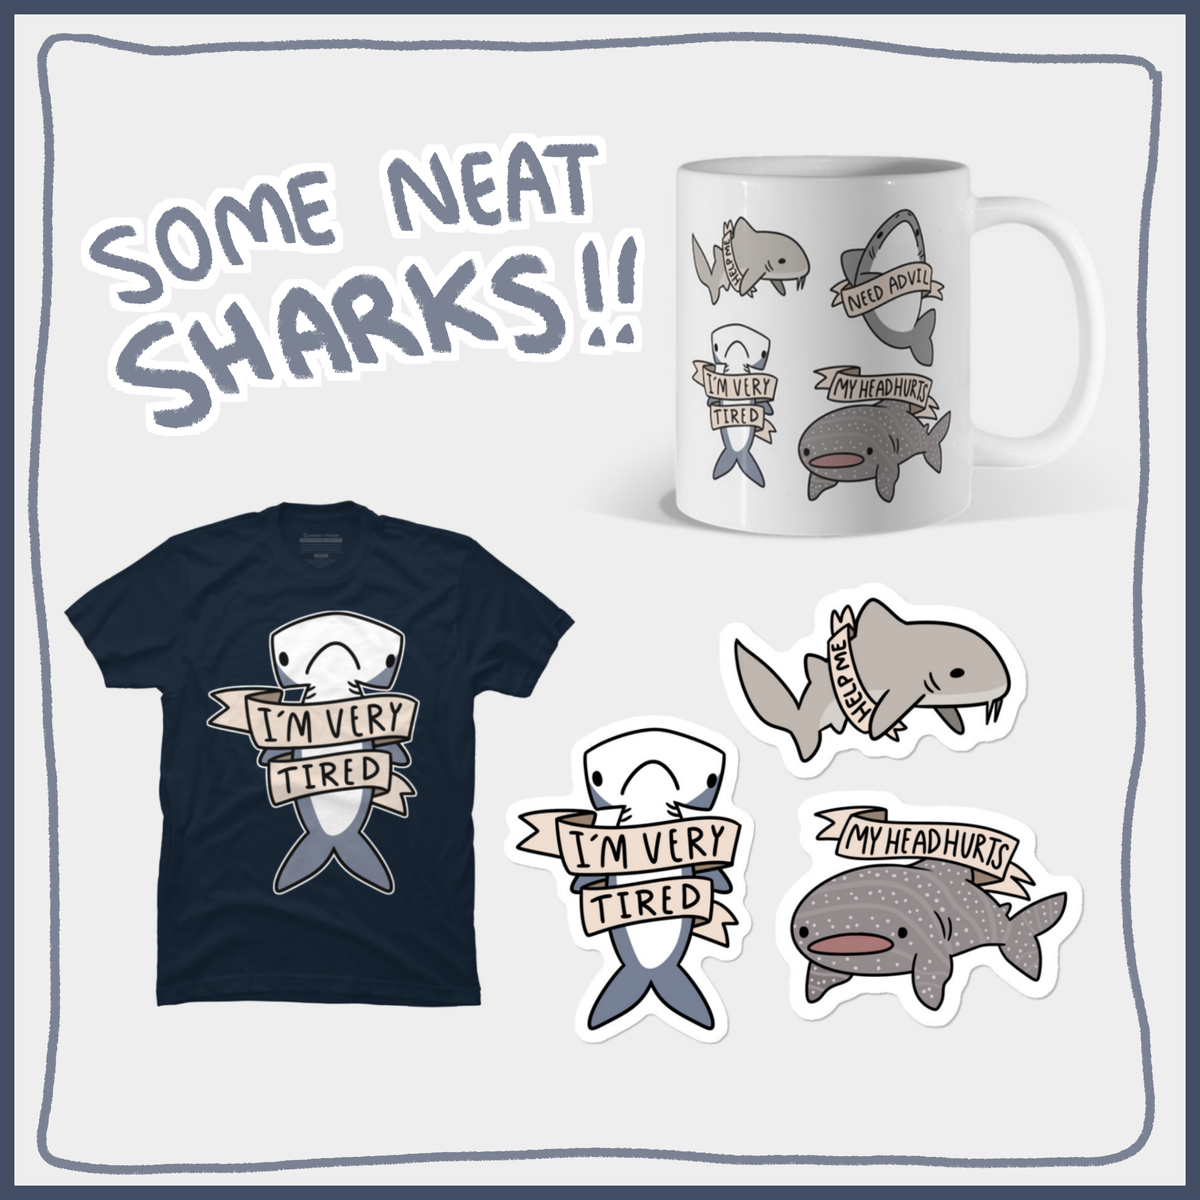 HEY! ⚡️If you like my art, and are in need of some fresh new stickers, mugs or clothing, check out my store!

You're directly supporting me, and there's even a 25% off sale going on right now with code SAVE25! 

https://t.co/8ctw9fqn8t 